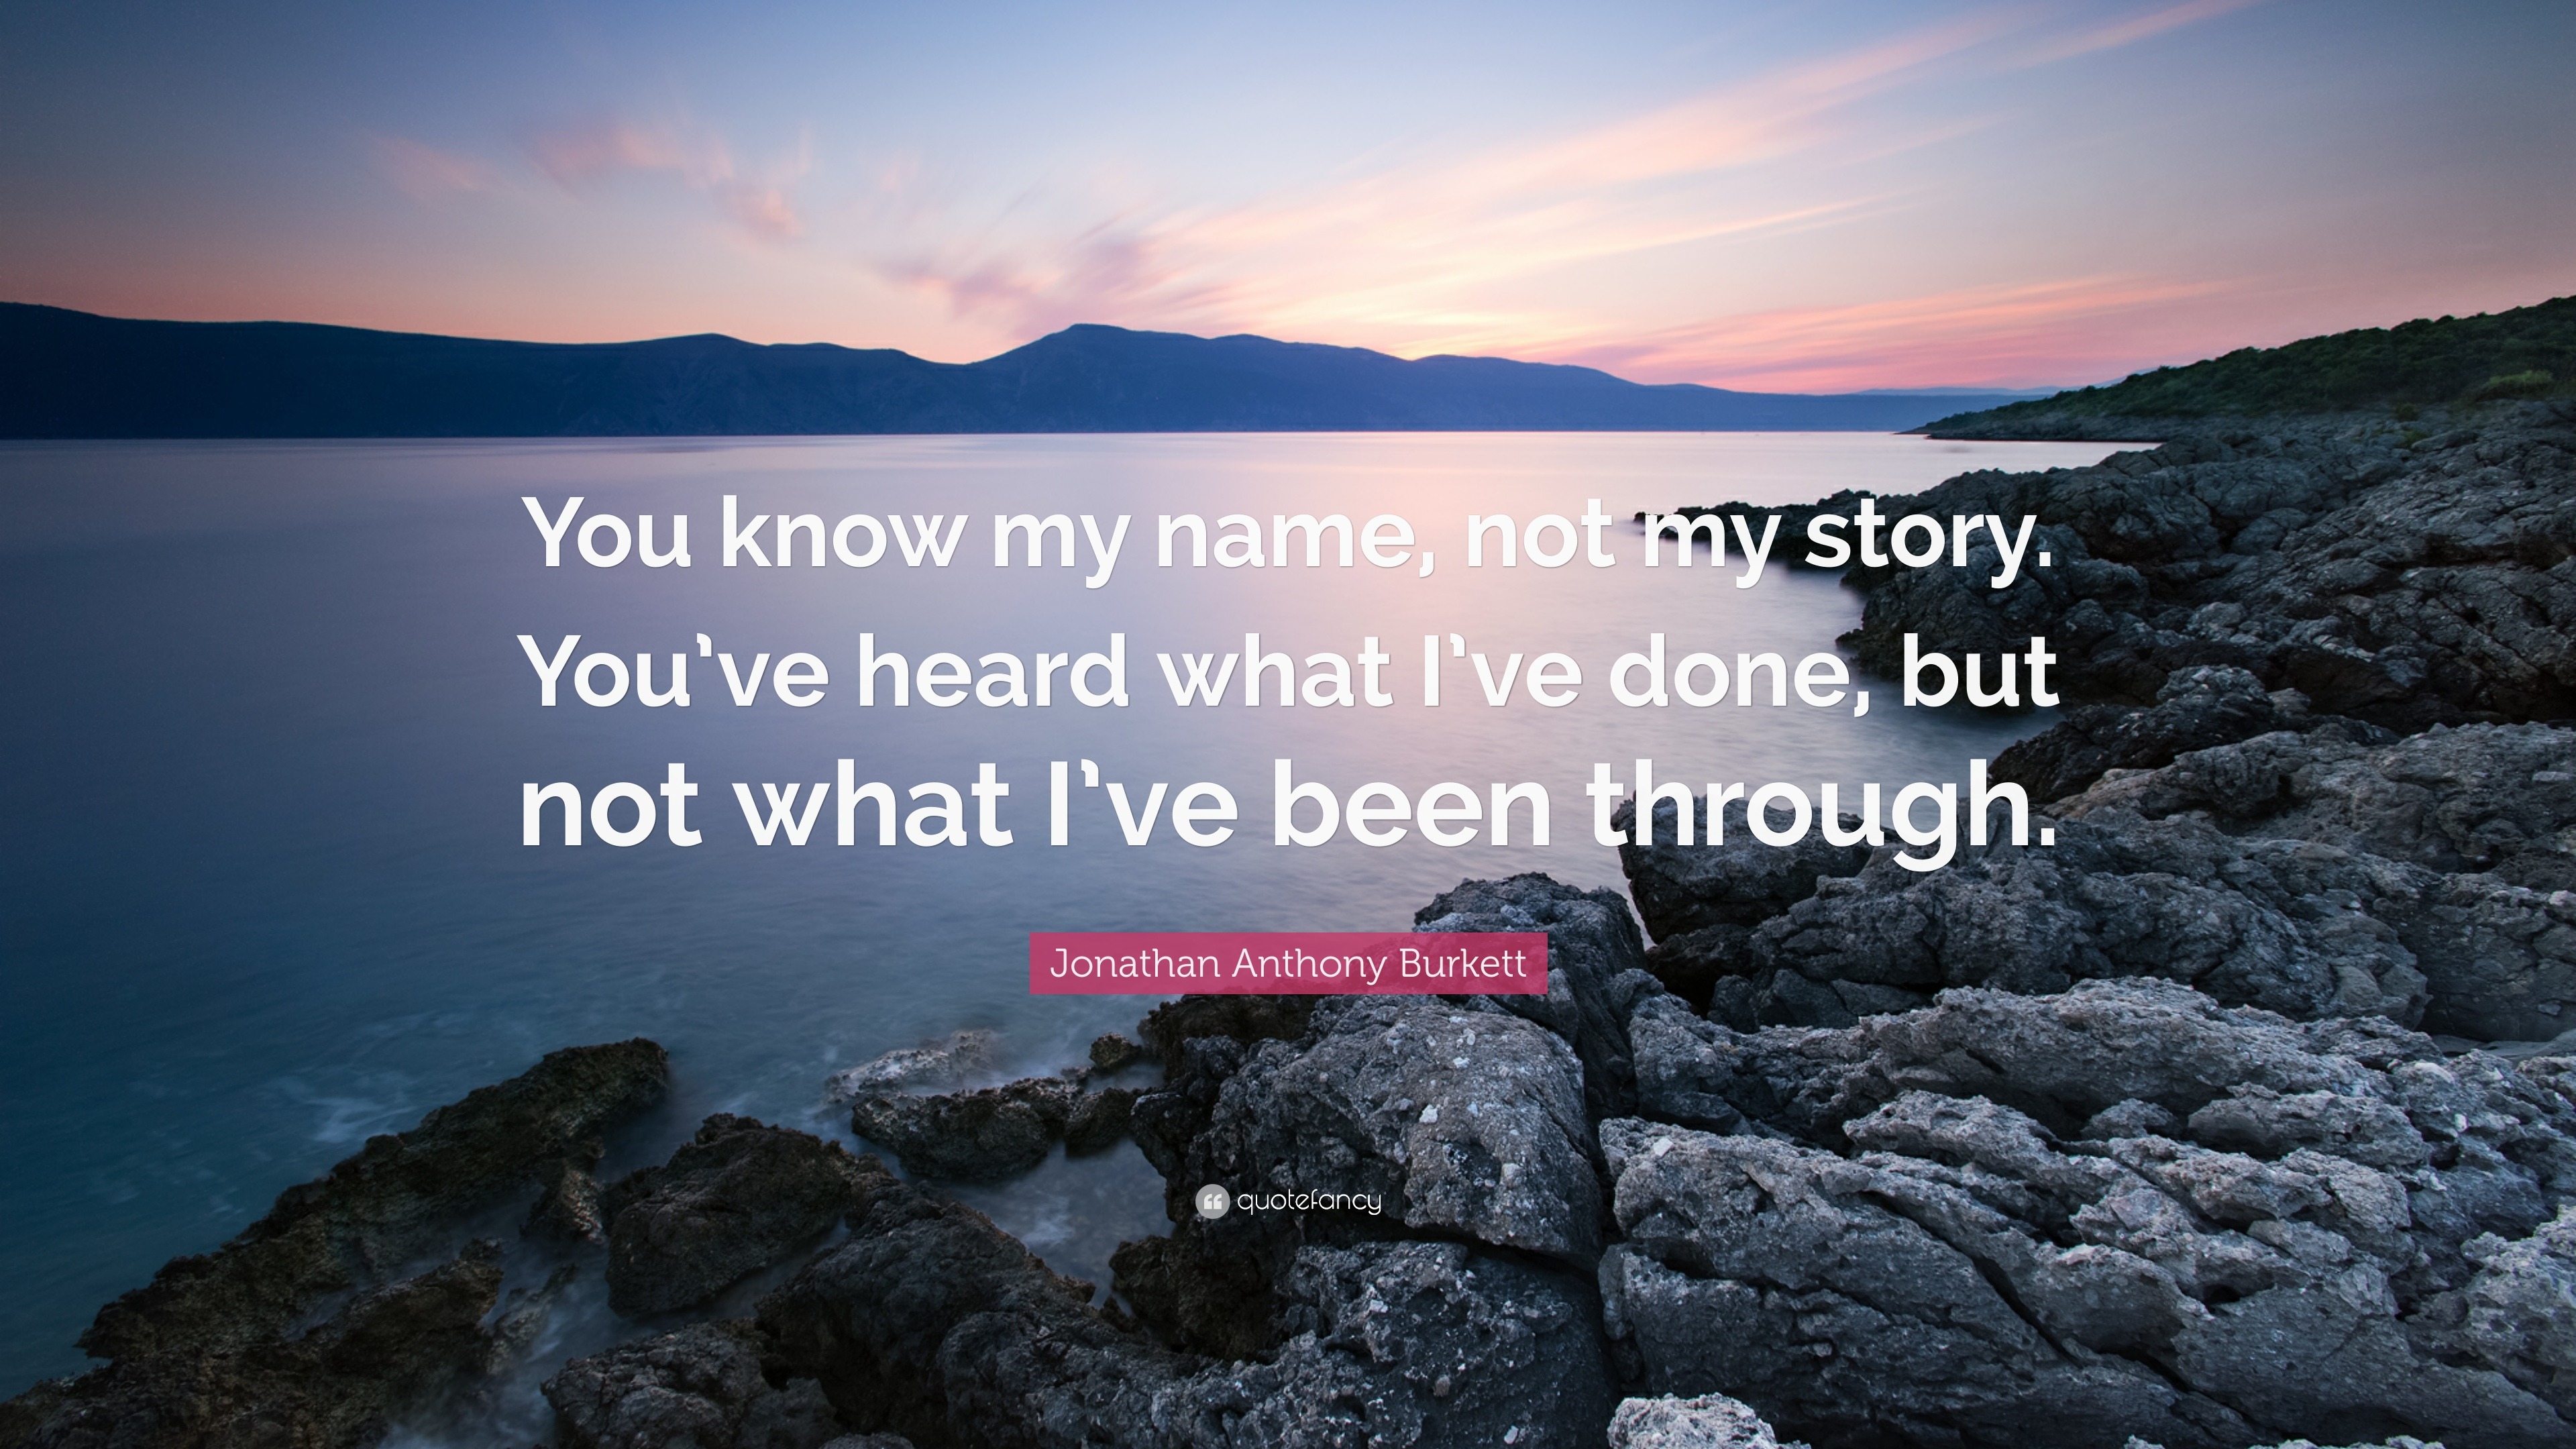 Shut up, you know my name not my story.